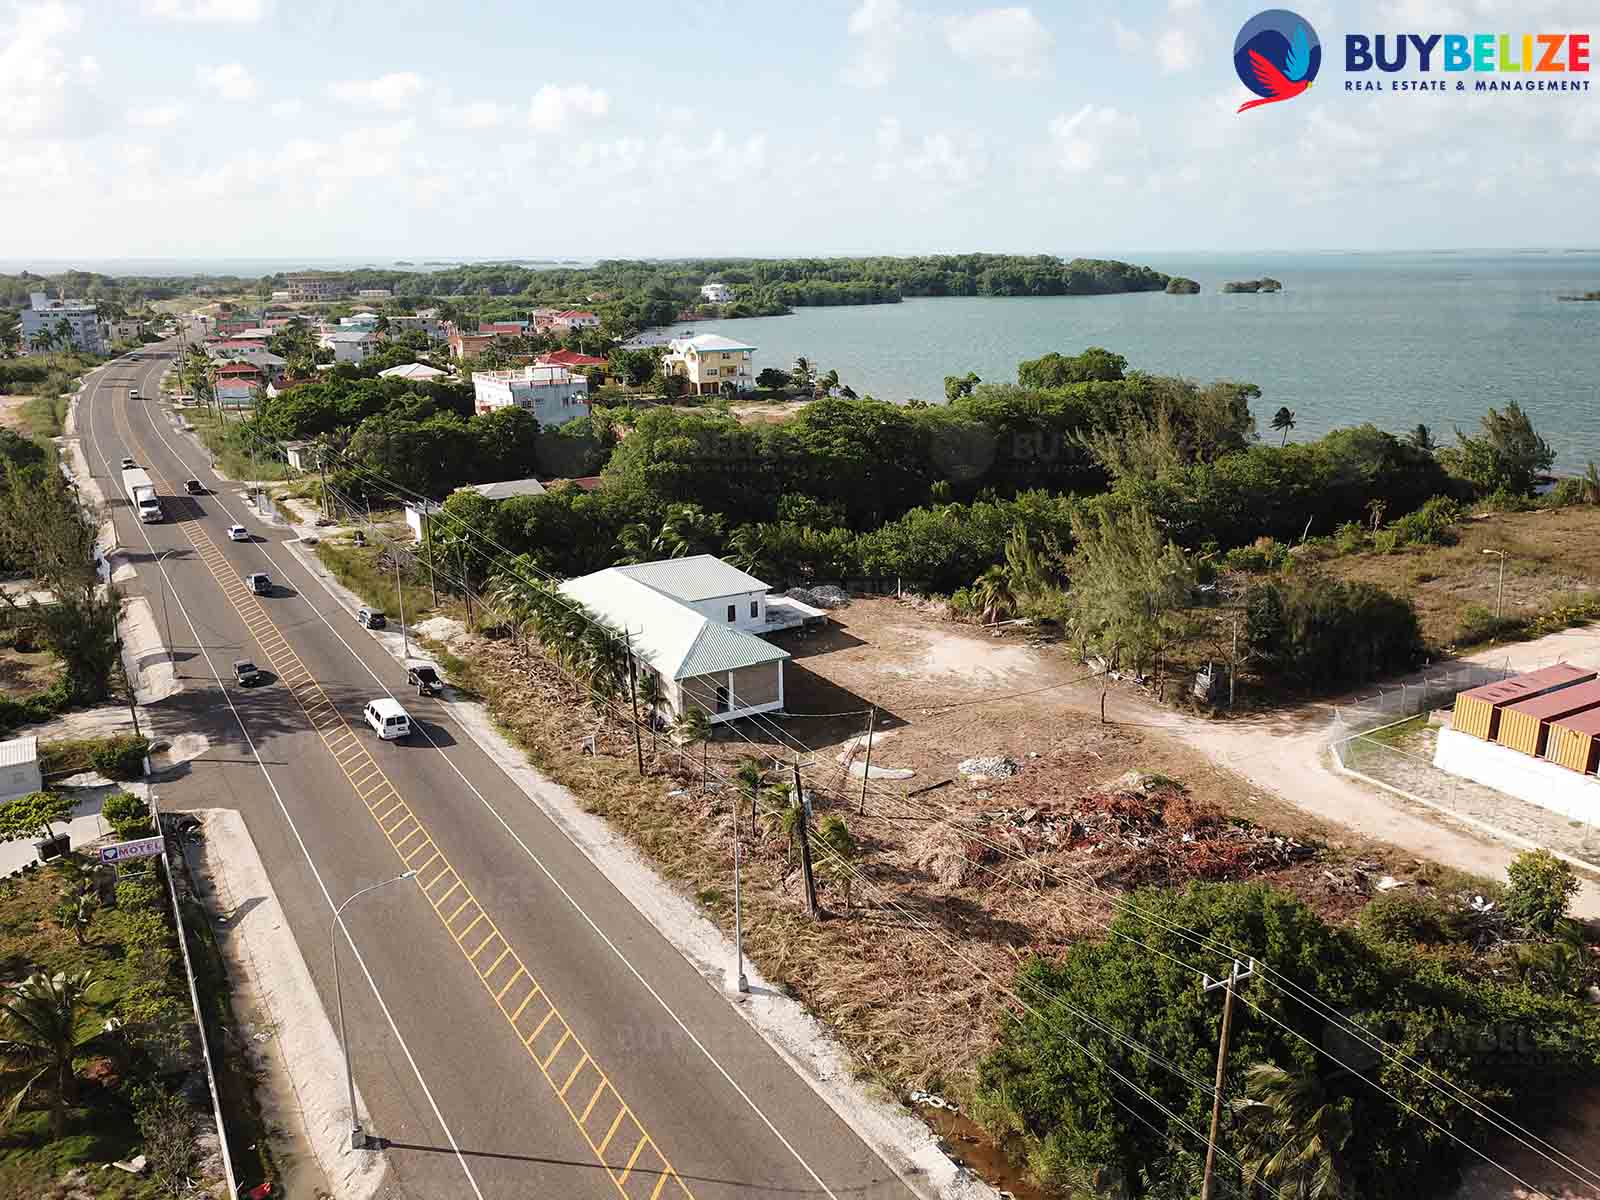 Commercial | Investment | Rental Opportunity with Exclusive parking entering Belize City